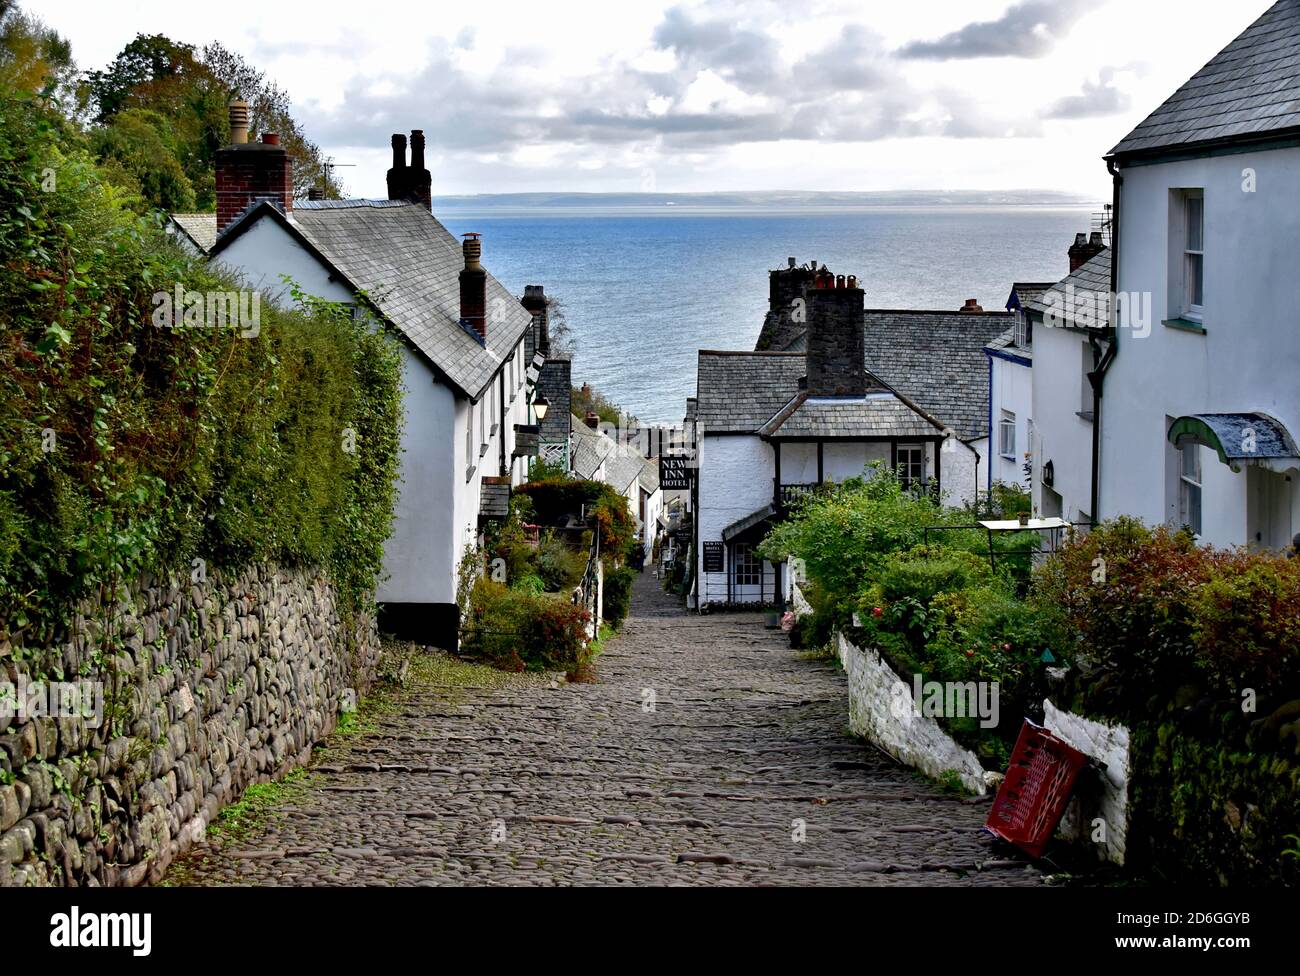 Cobbled street in Clovelly. Stock Photo